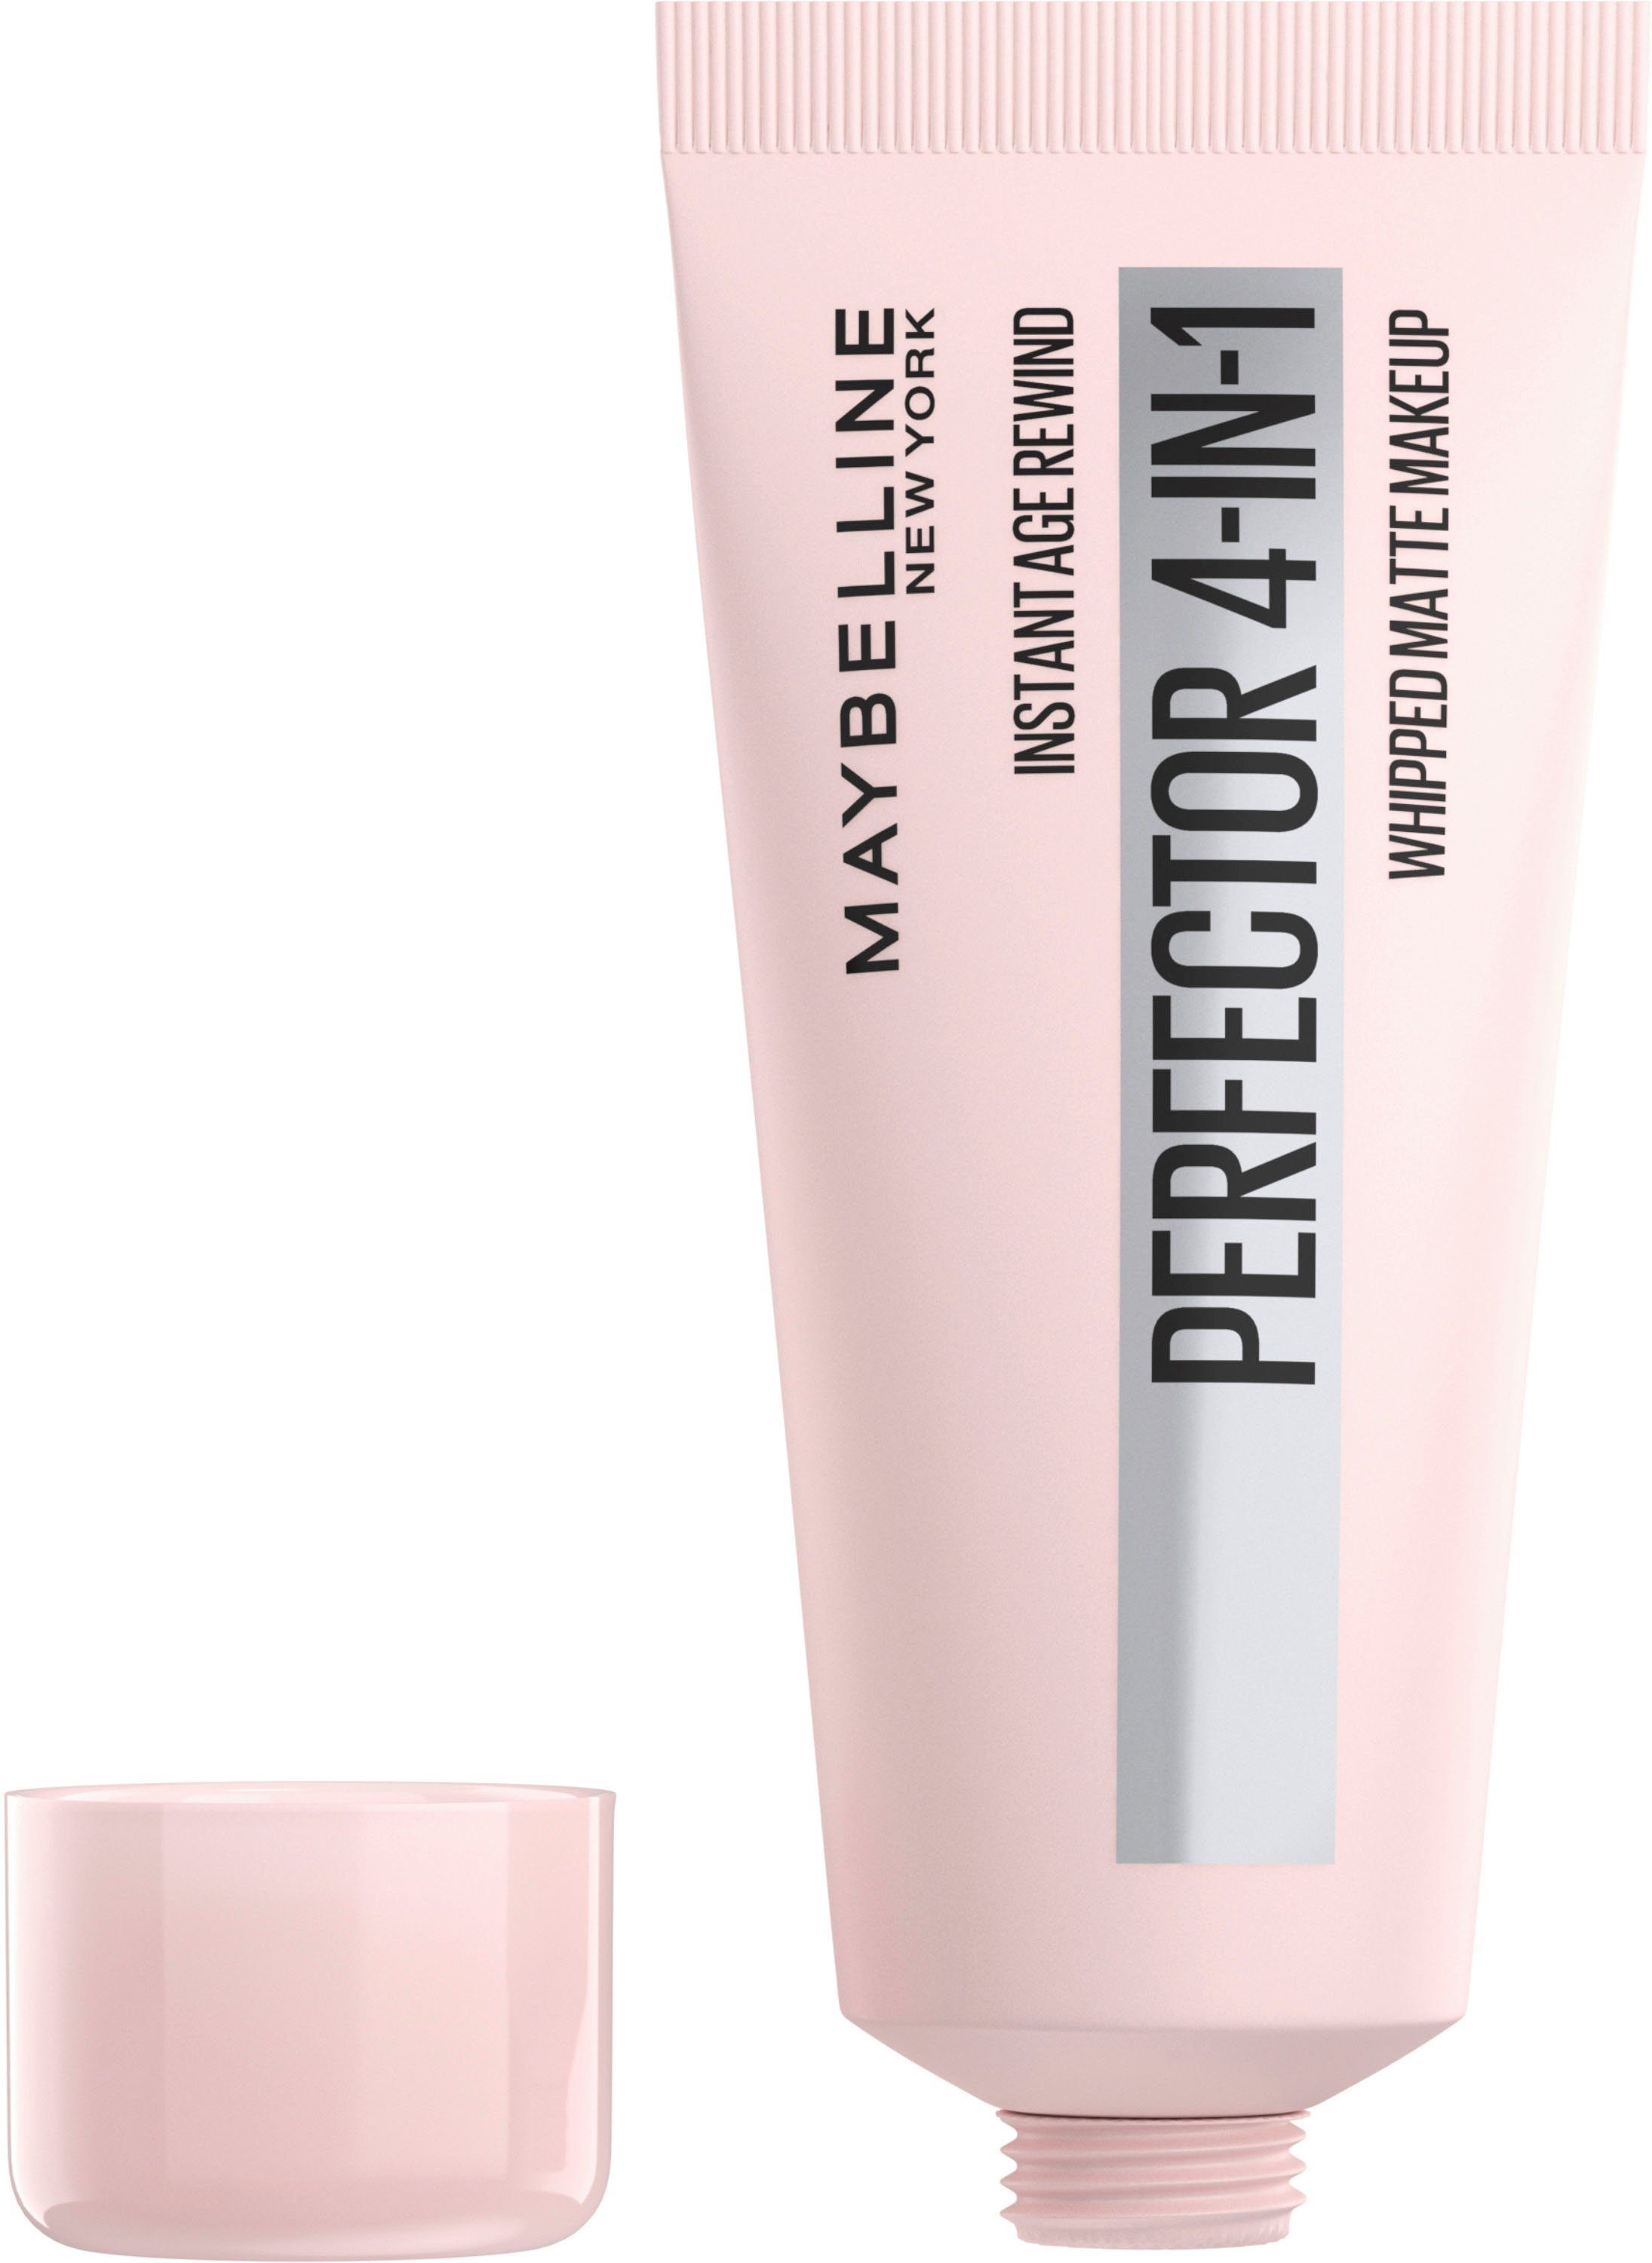 Matte Instant Perfector Foundation NEW Light MAYBELLINE 1 YORK